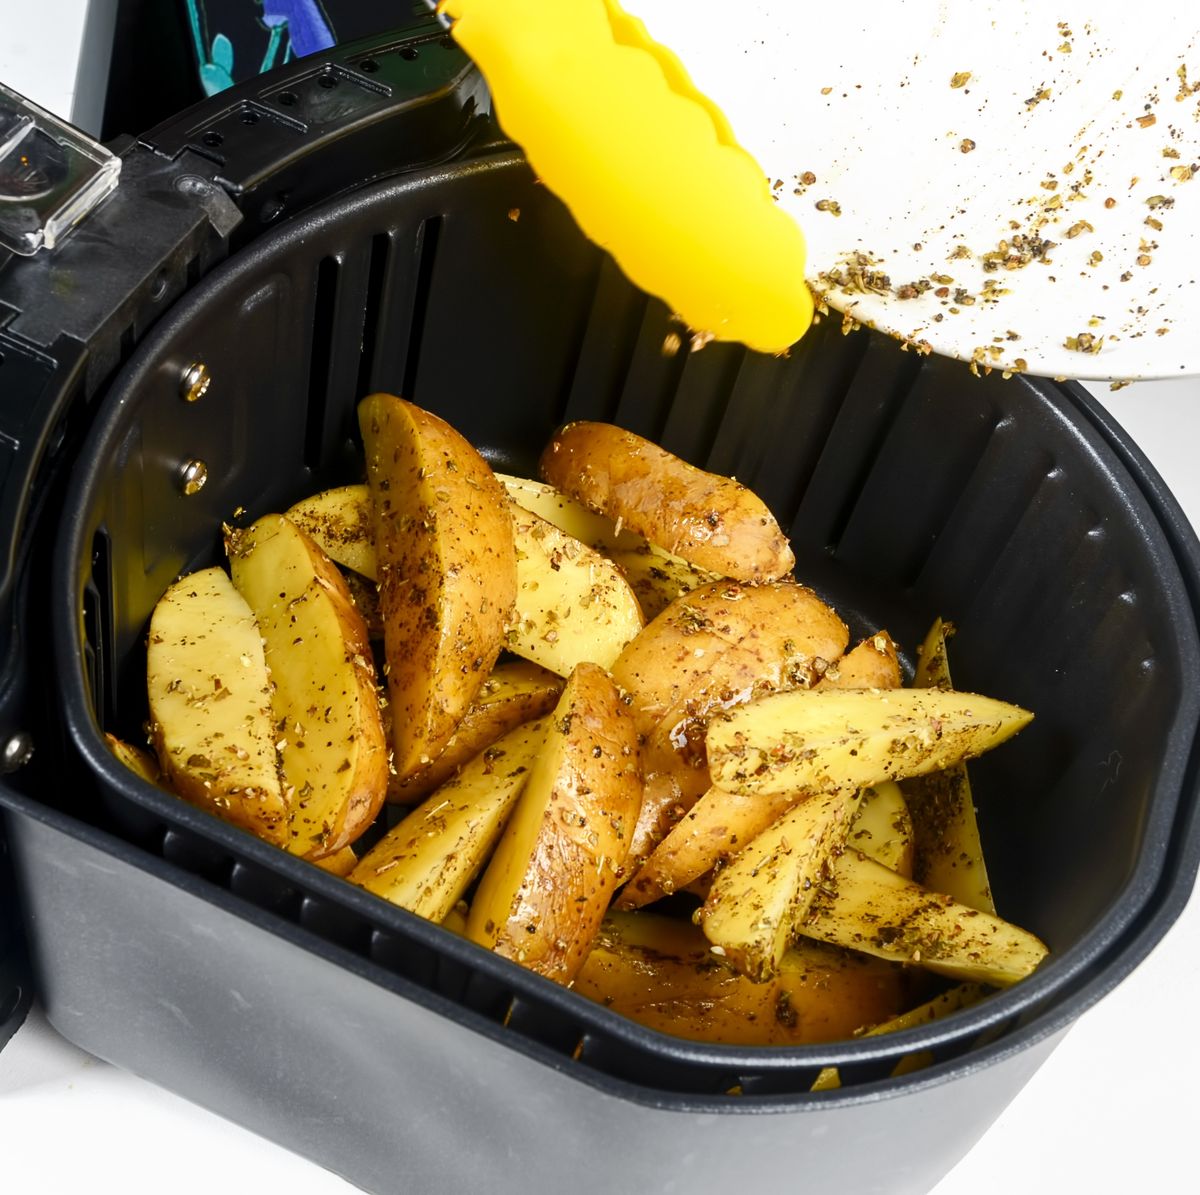 https://hips.hearstapps.com/hmg-prod/images/air-fryer-grill-potato-at-home-isolated-on-white-royalty-free-image-1640714864.jpg?crop=0.665xw:1.00xh;0.0385xw,0&resize=1200:*